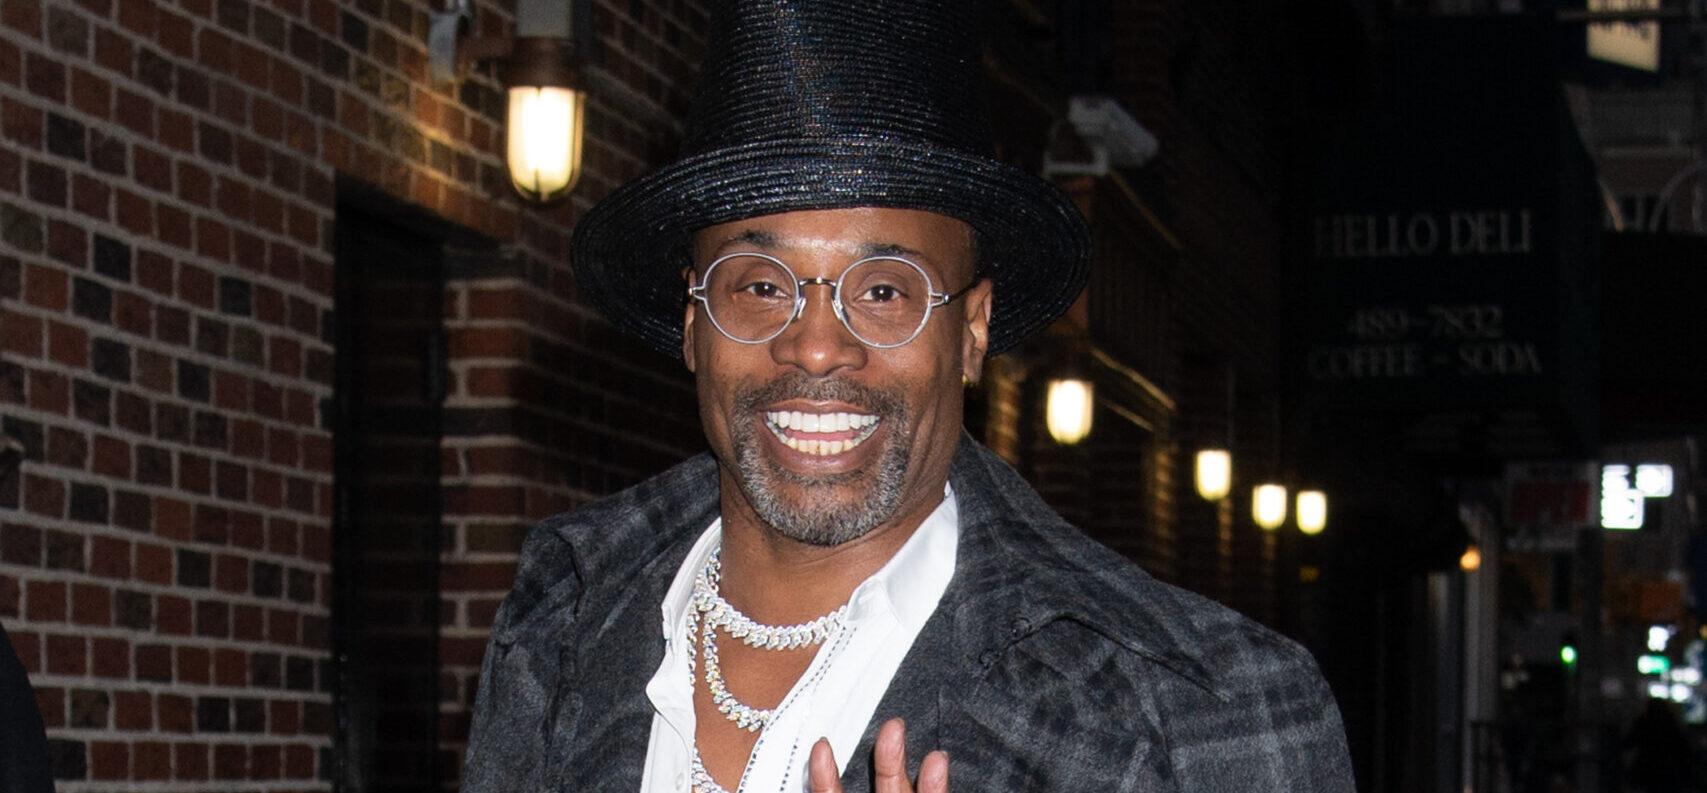 Billy Porter Reveals He’s ‘Dating Around’ After His Divorce: ‘They Got To Take Care of Me’